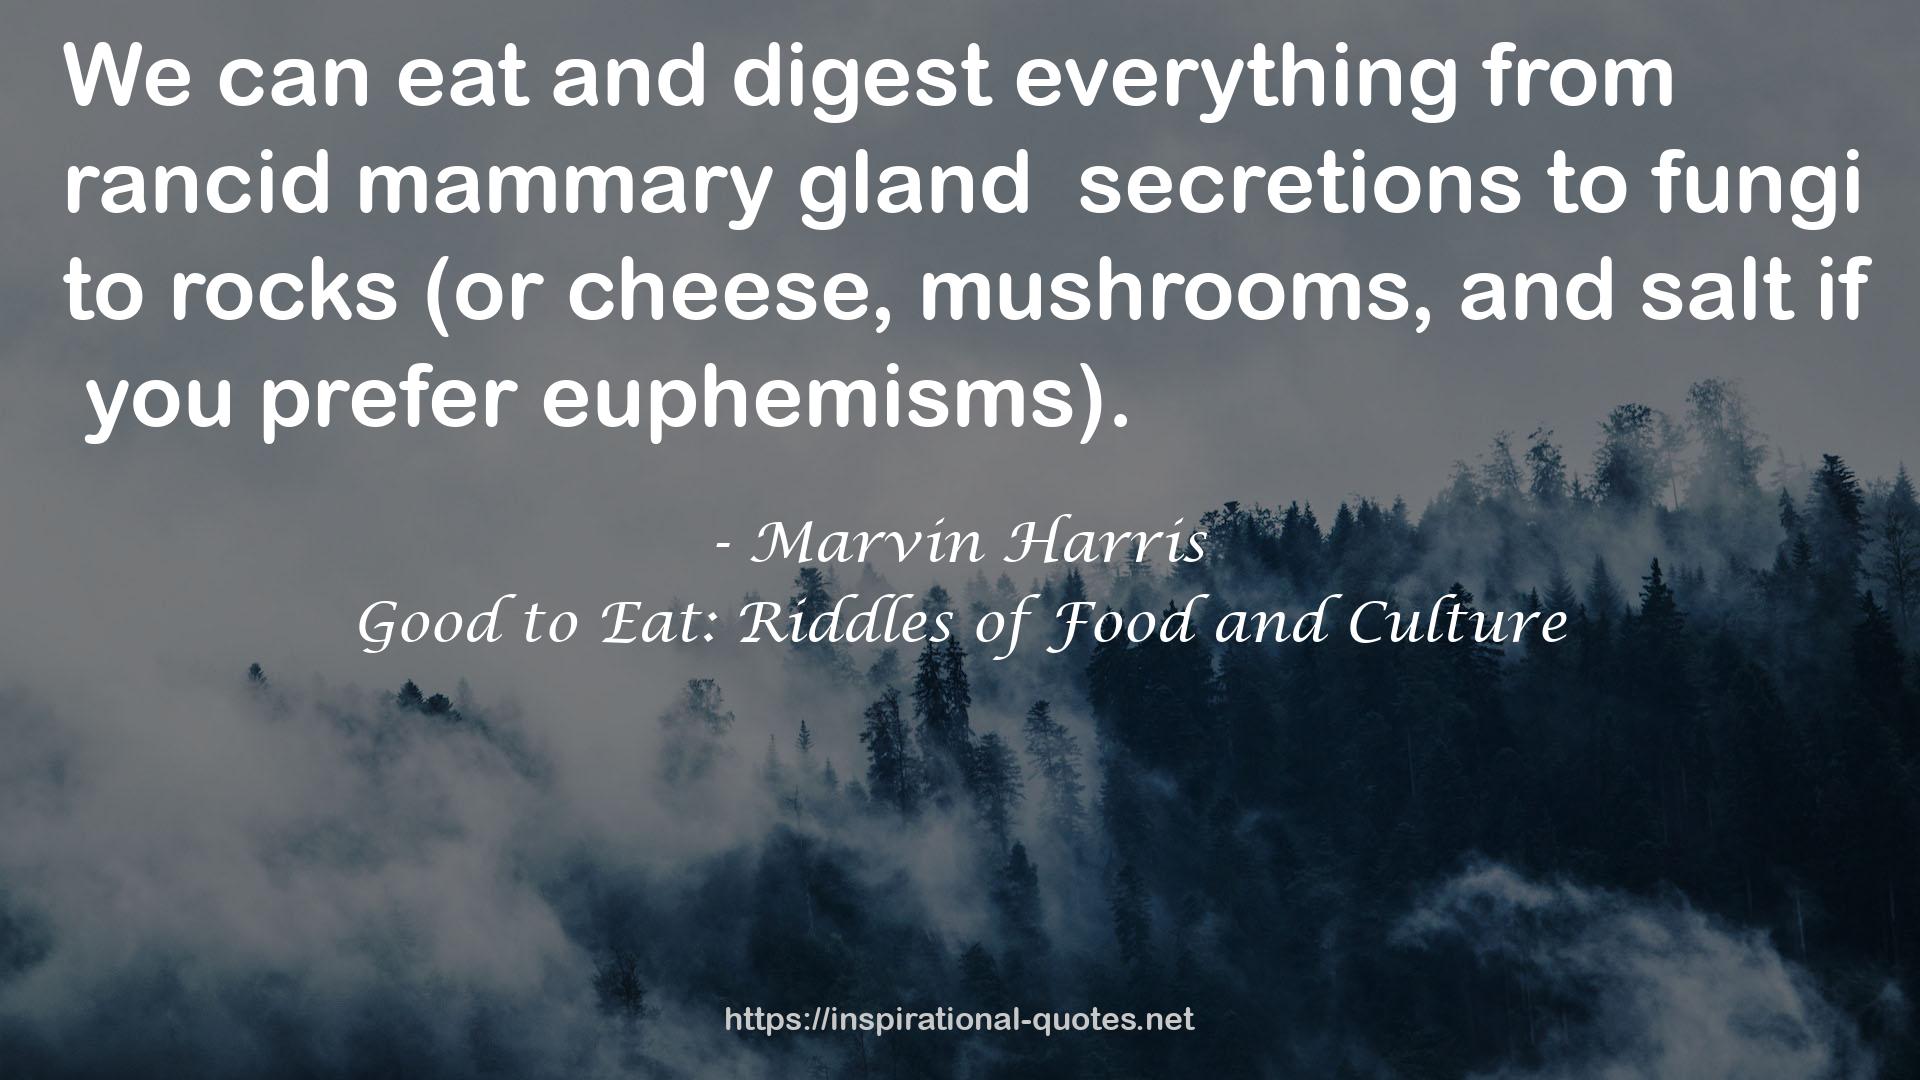 Good to Eat: Riddles of Food and Culture QUOTES